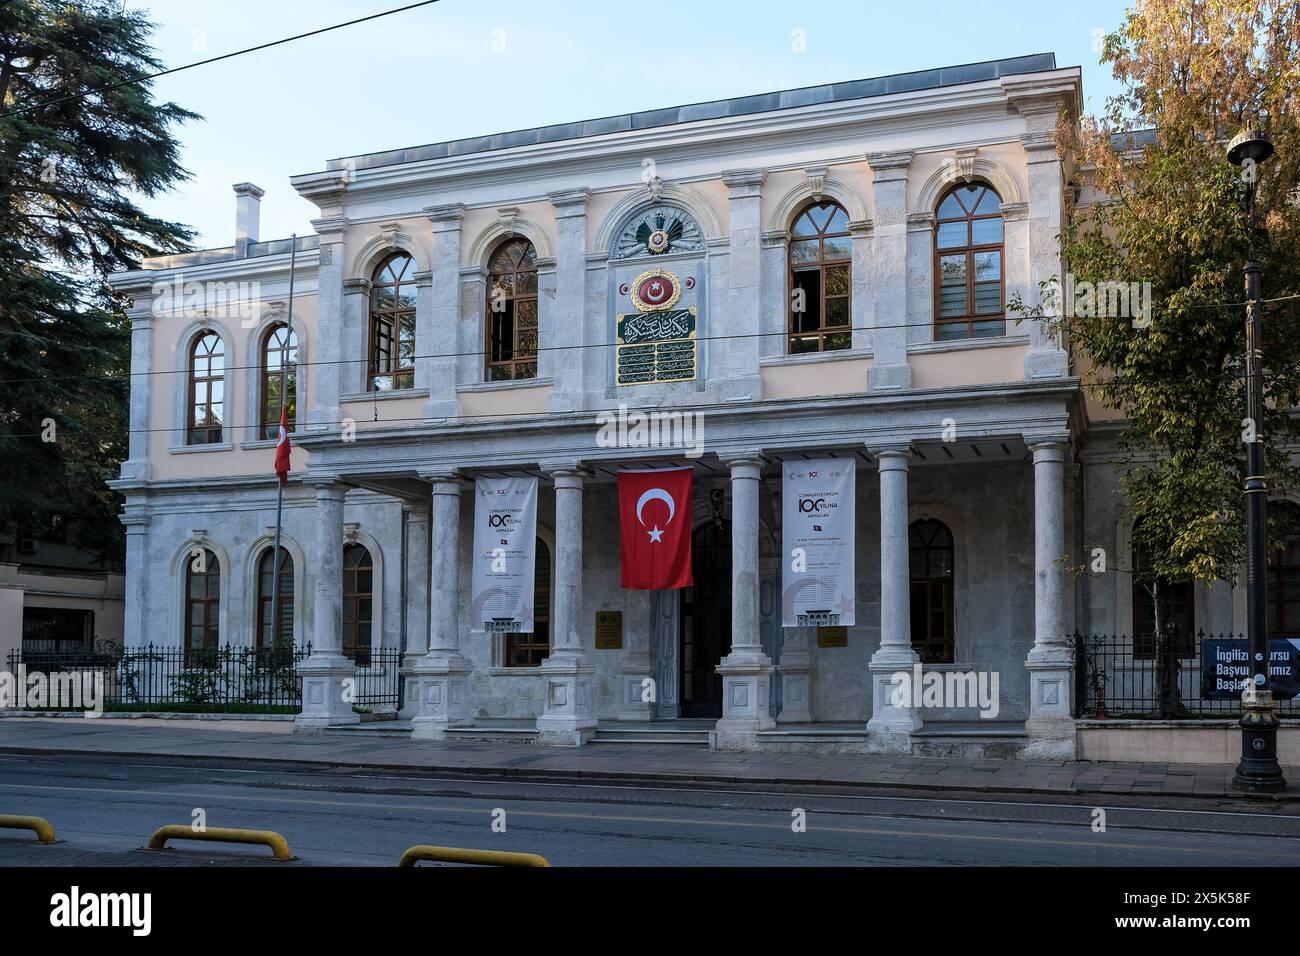 View of the Gulhane campus of the Faculty of Fine Arts FSMVU, located in the city center, Fatih district,Istanbul, Turkey, Europe Copyright: MLTZ 1373 Stock Photo